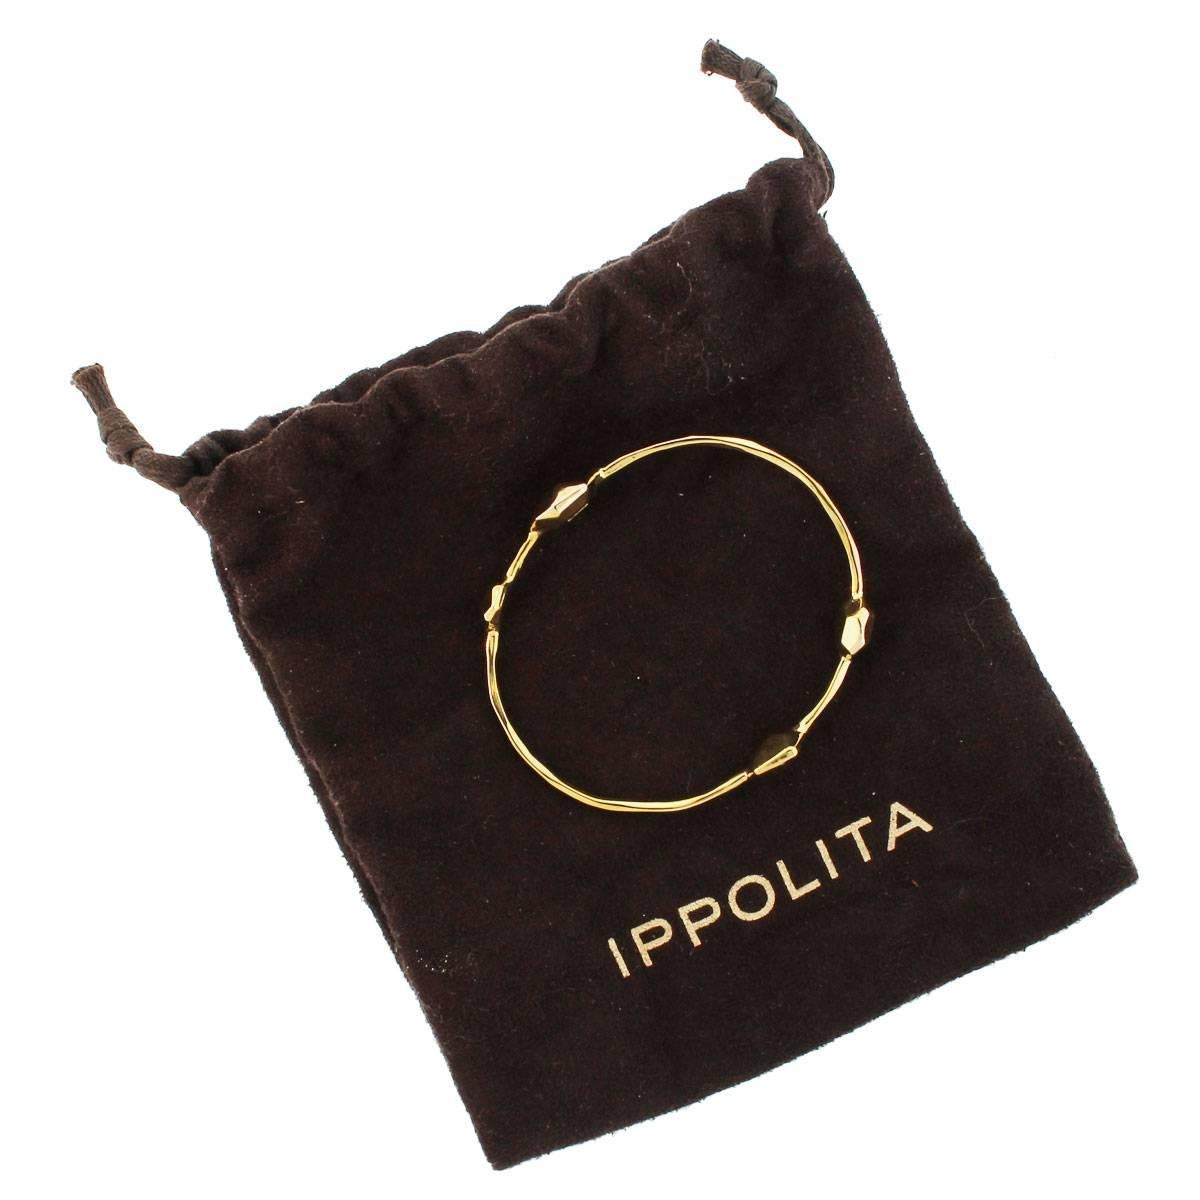 Brand
Ippolita
Style	18k Yellow Gold Bangle Bracelet
Material	18k Yellow Gold
Total Weight
7.4g (4.8dwt)
Measurements	Will fit a 8" wrist
Closure	No Clasp, Slip On
Additional Details
Comes with Ippolita bangle bracelet pouch!
SKU
G3980UEE